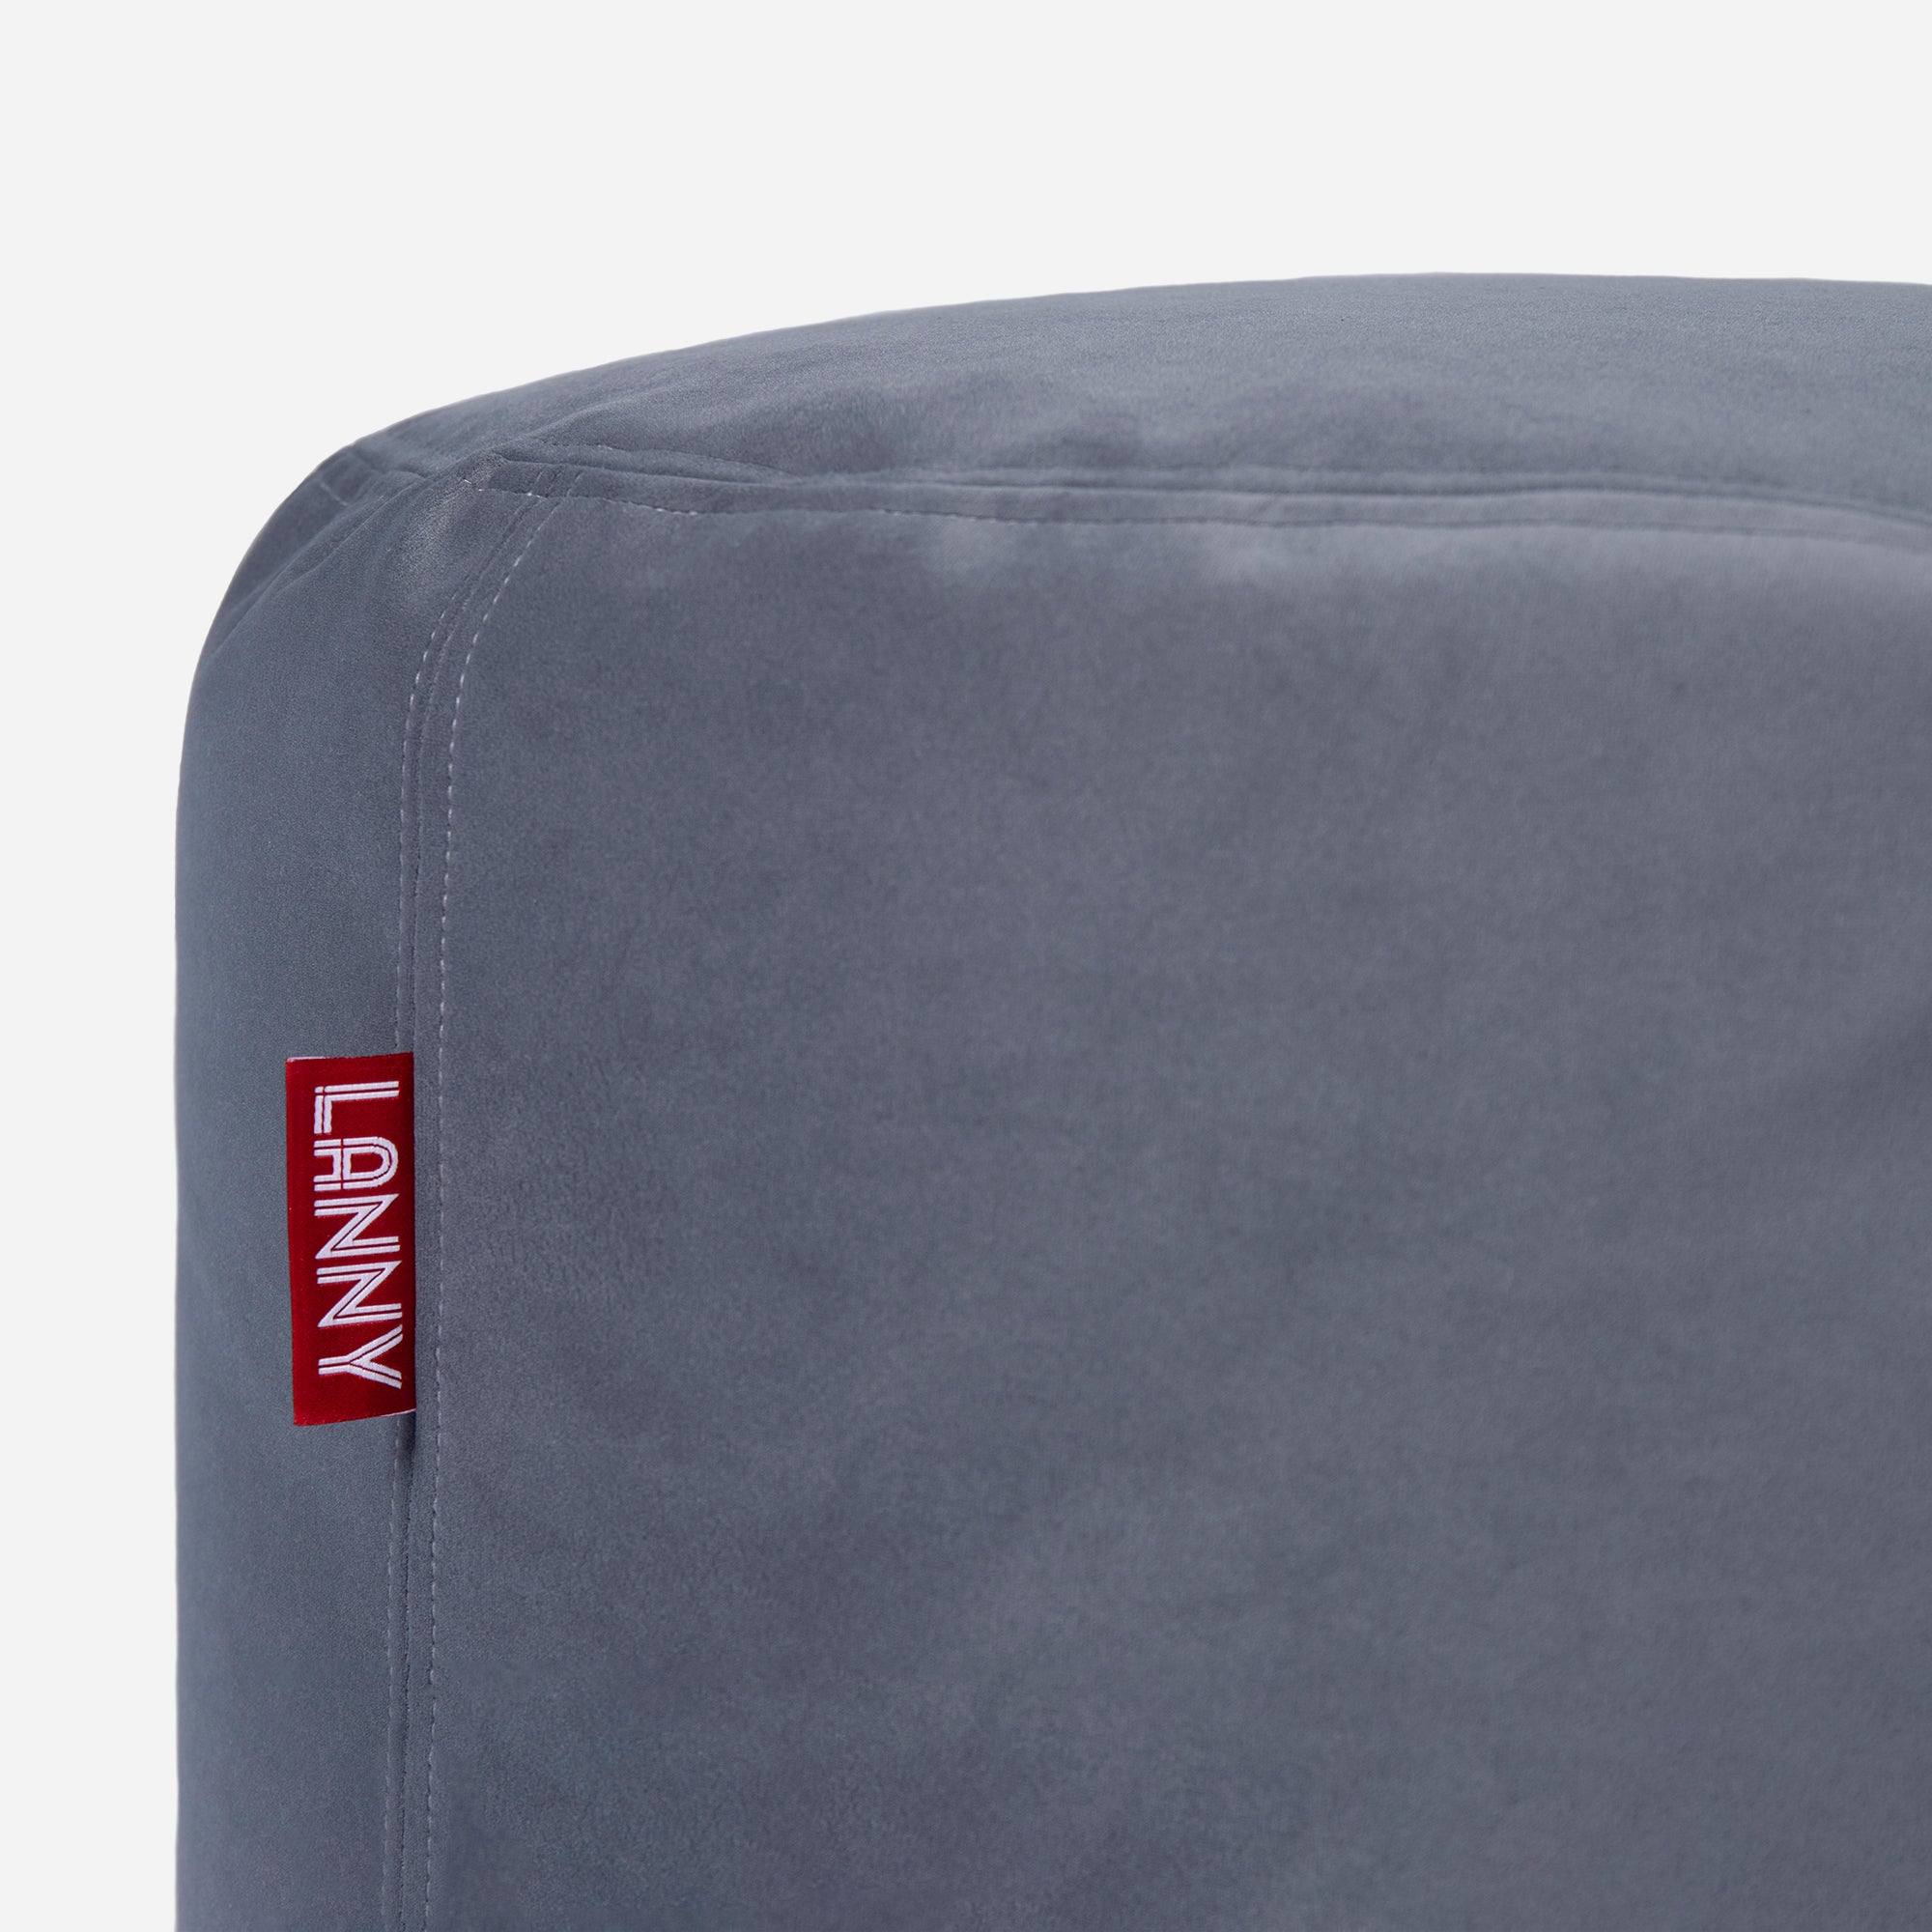 Lanny pouf made from velvet fabric in Gray color